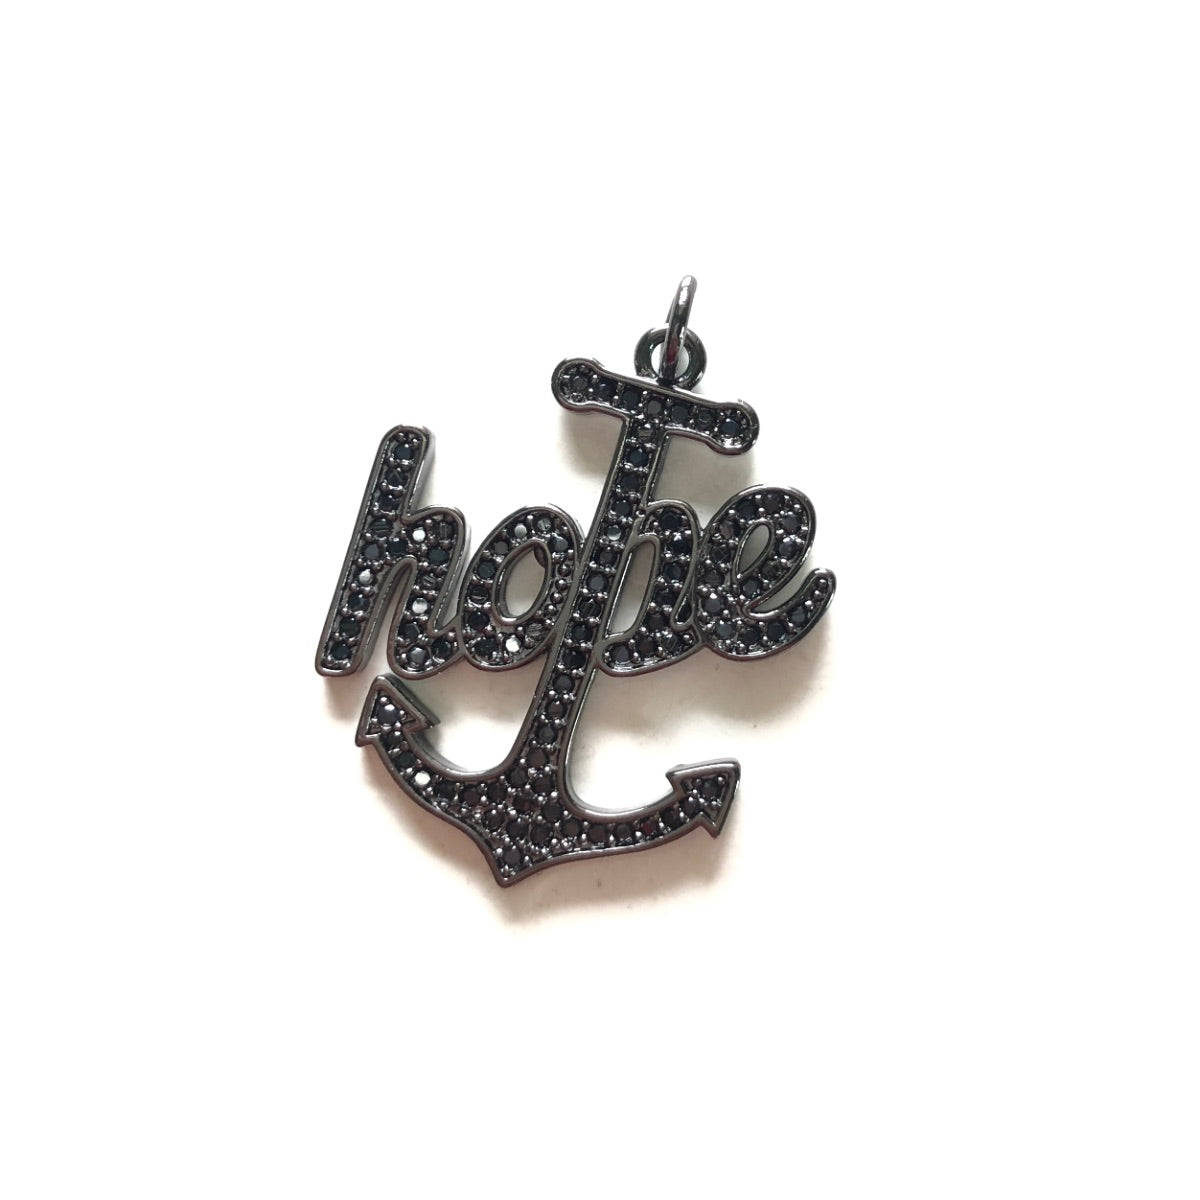 10pcs/lot 33*27mm CZ Paved Hope Anchor for the Soul Word Charms Black on Black CZ Paved Charms Christian Quotes Words & Quotes Charms Beads Beyond